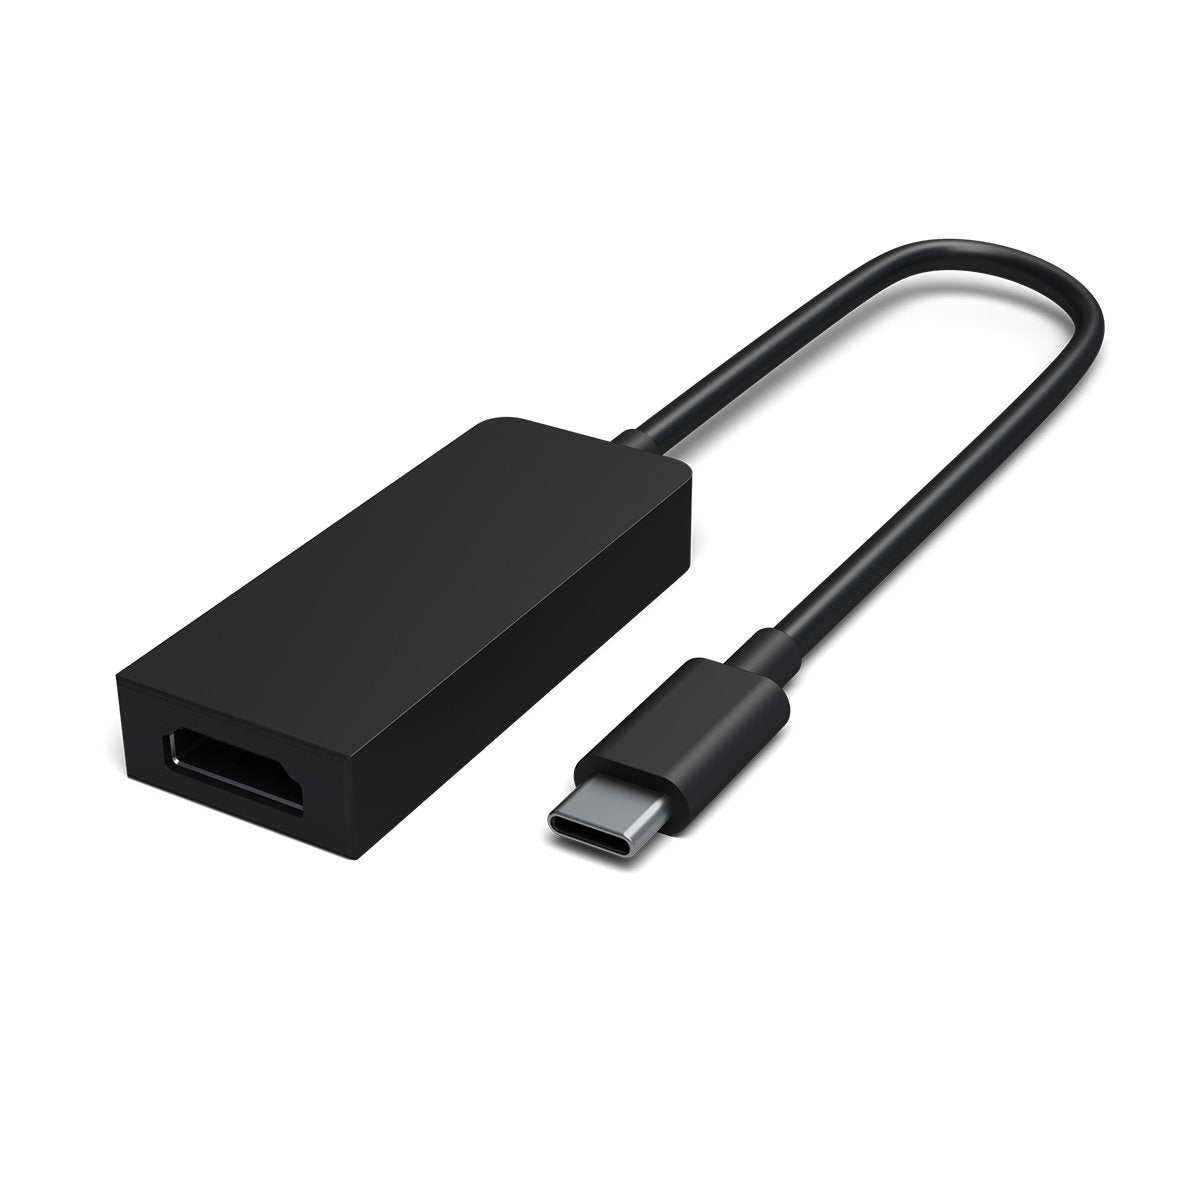 Microsoft Surface USB-C to HDMI Adapter